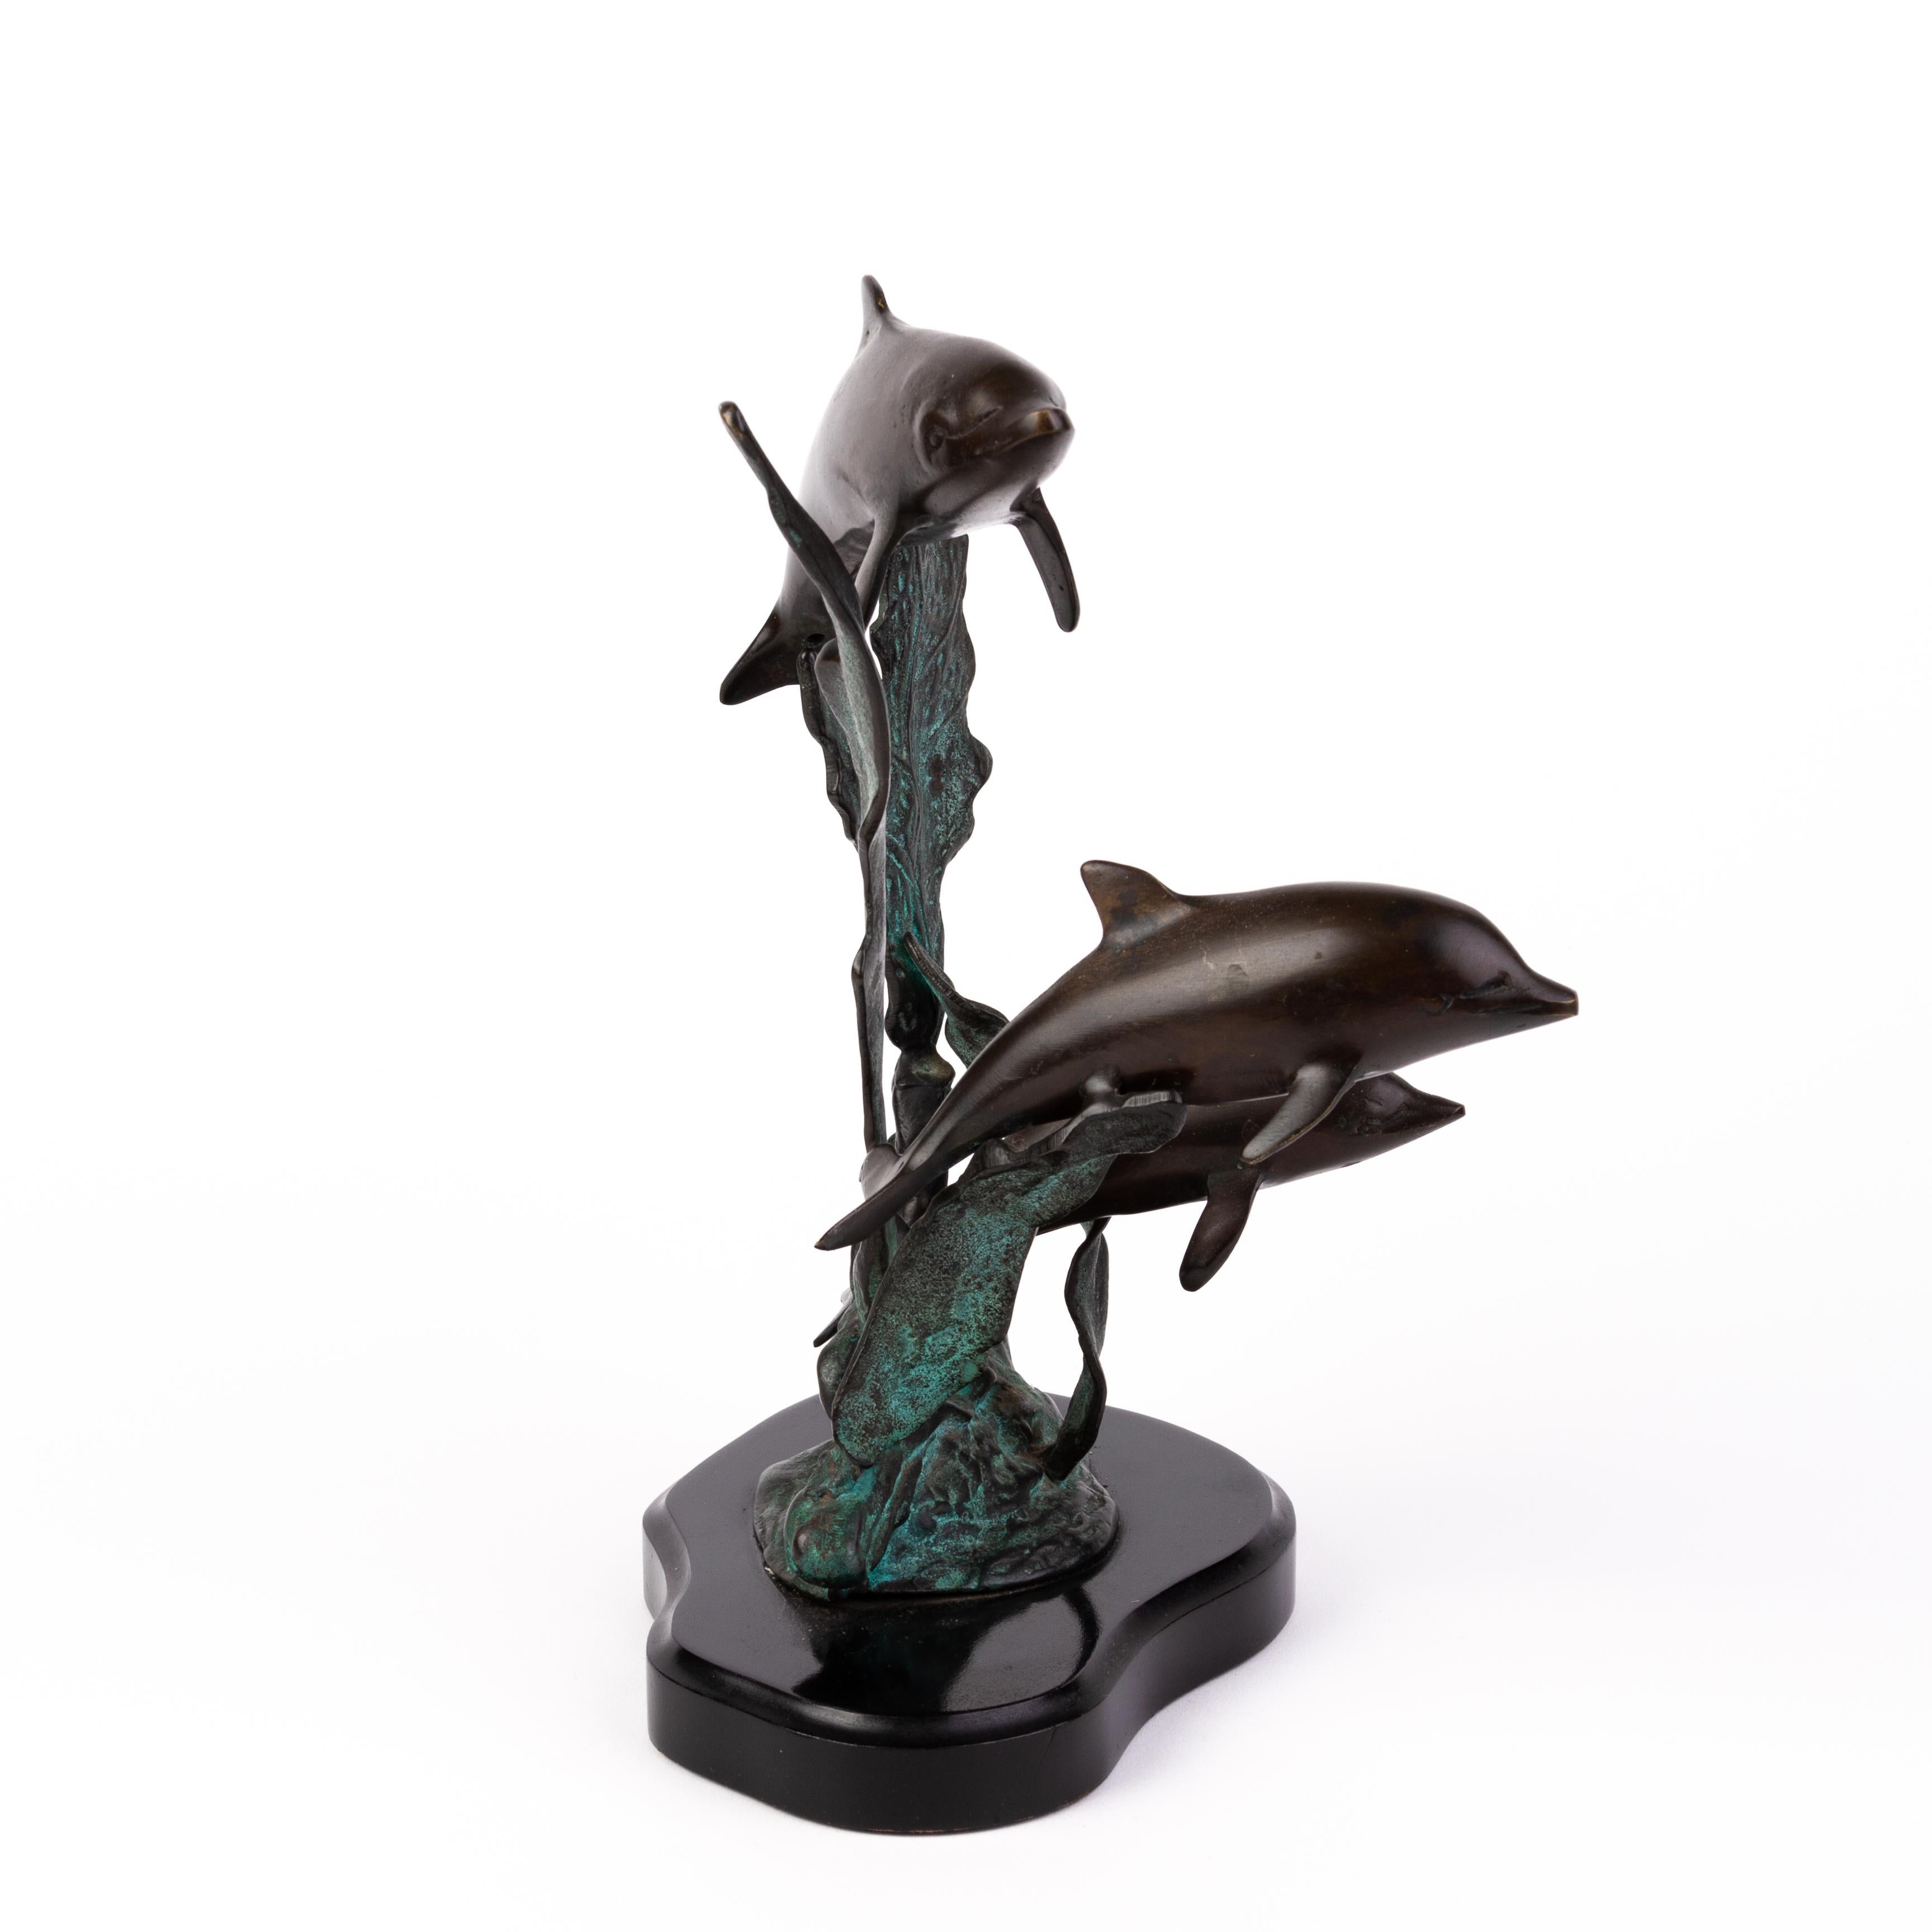 In good condition
From a private collection
Free international shipping
Bronze Dolphins Sculpture on Marble Base 